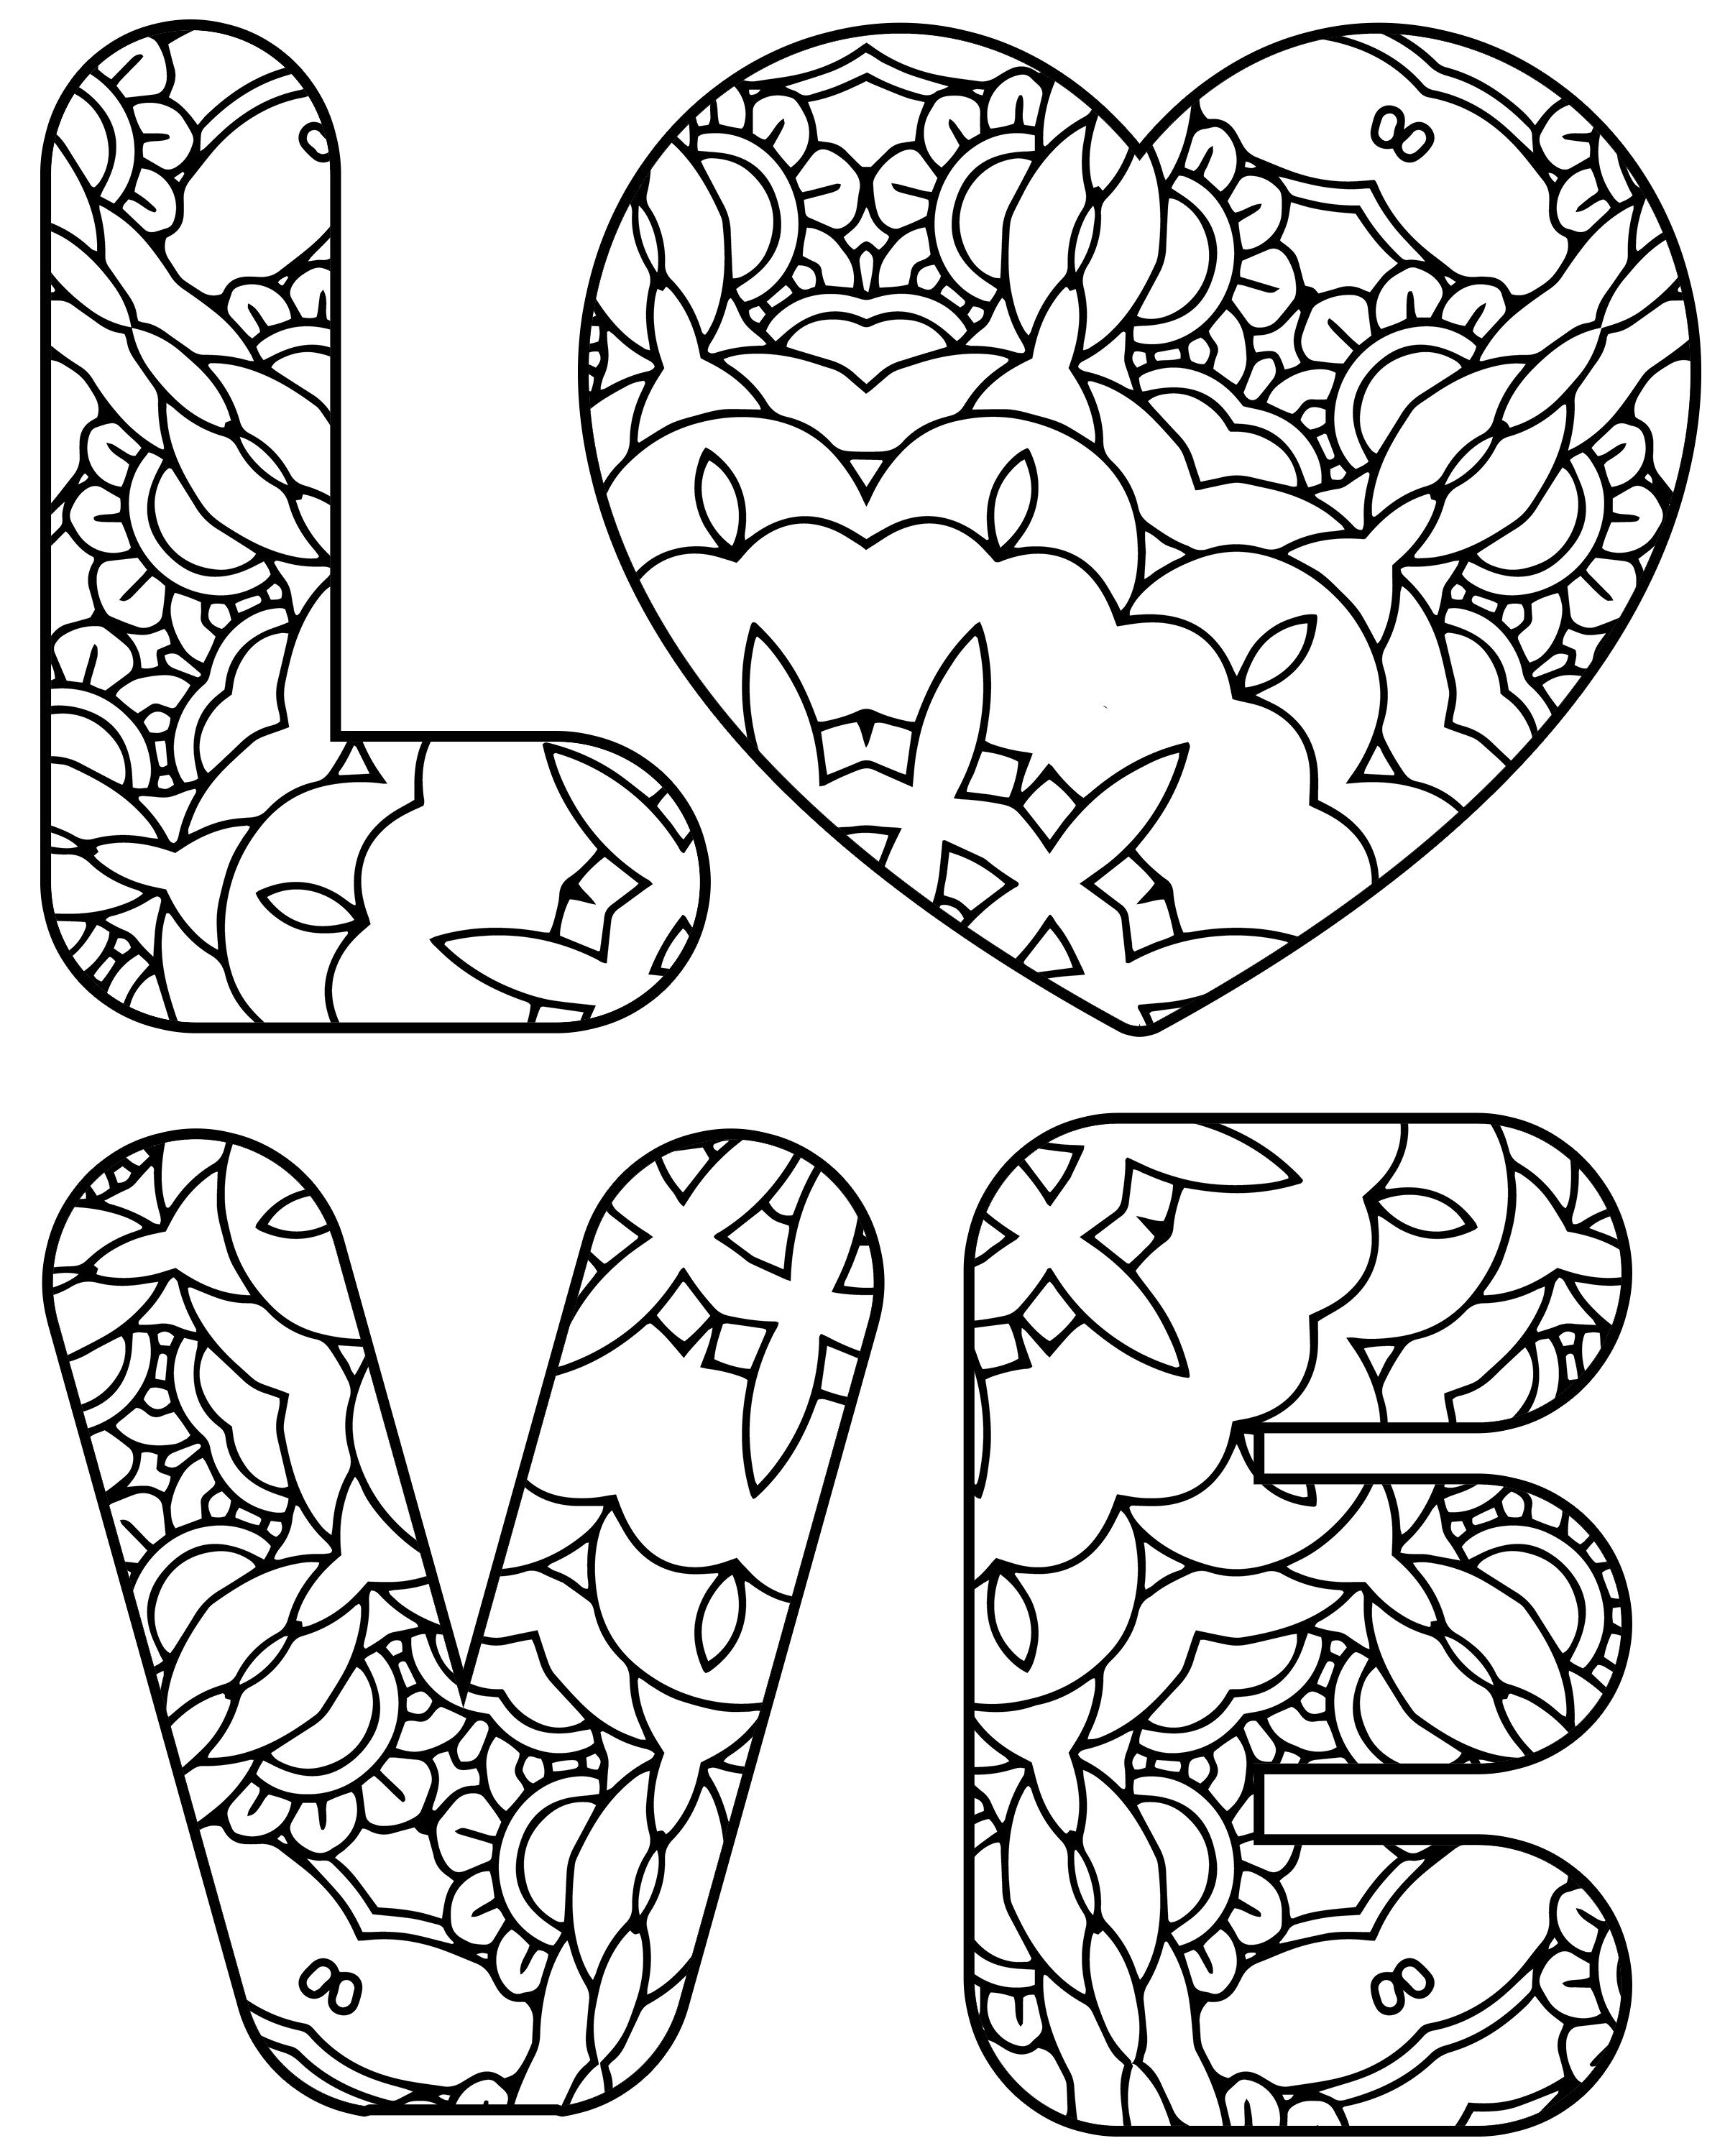 The Word Love Coloring Pages at Free printable